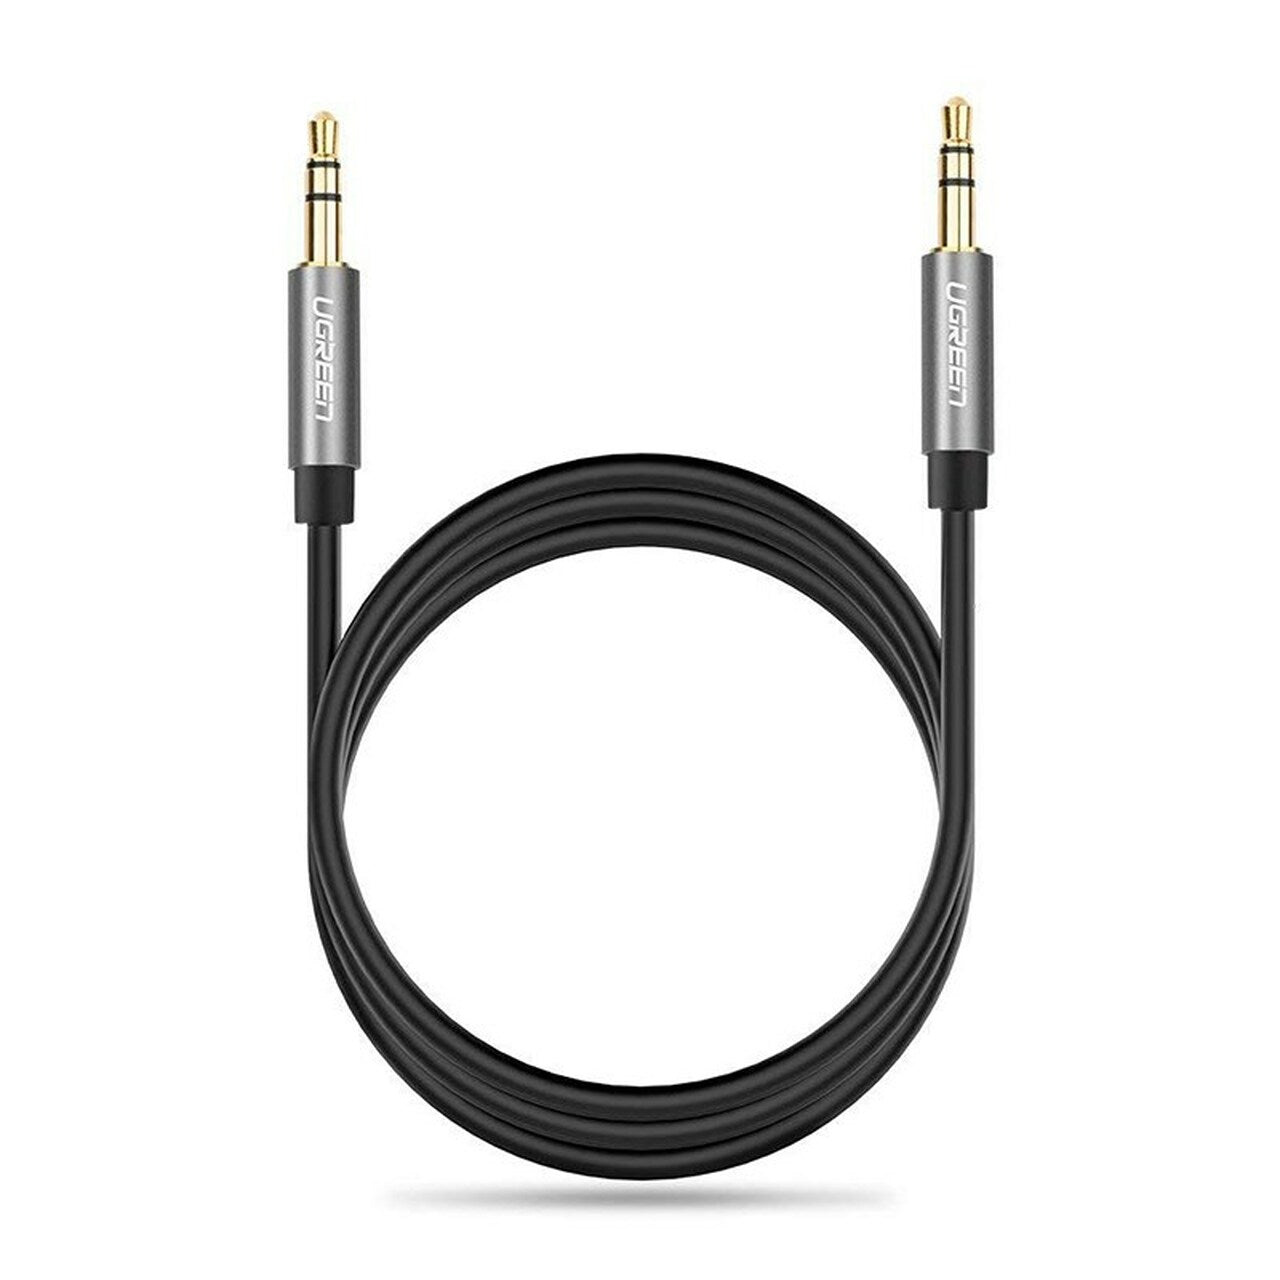 UGREEN 3.5mm TRS Male to Male Audio Cable for Mobile Phone, Tablet, PC, MP3 Player to Digital Audio Device, Speakers, Amplifiers, and Soundbars (0.5M / 1M / 1.5M / 2M / 3M / 5M)